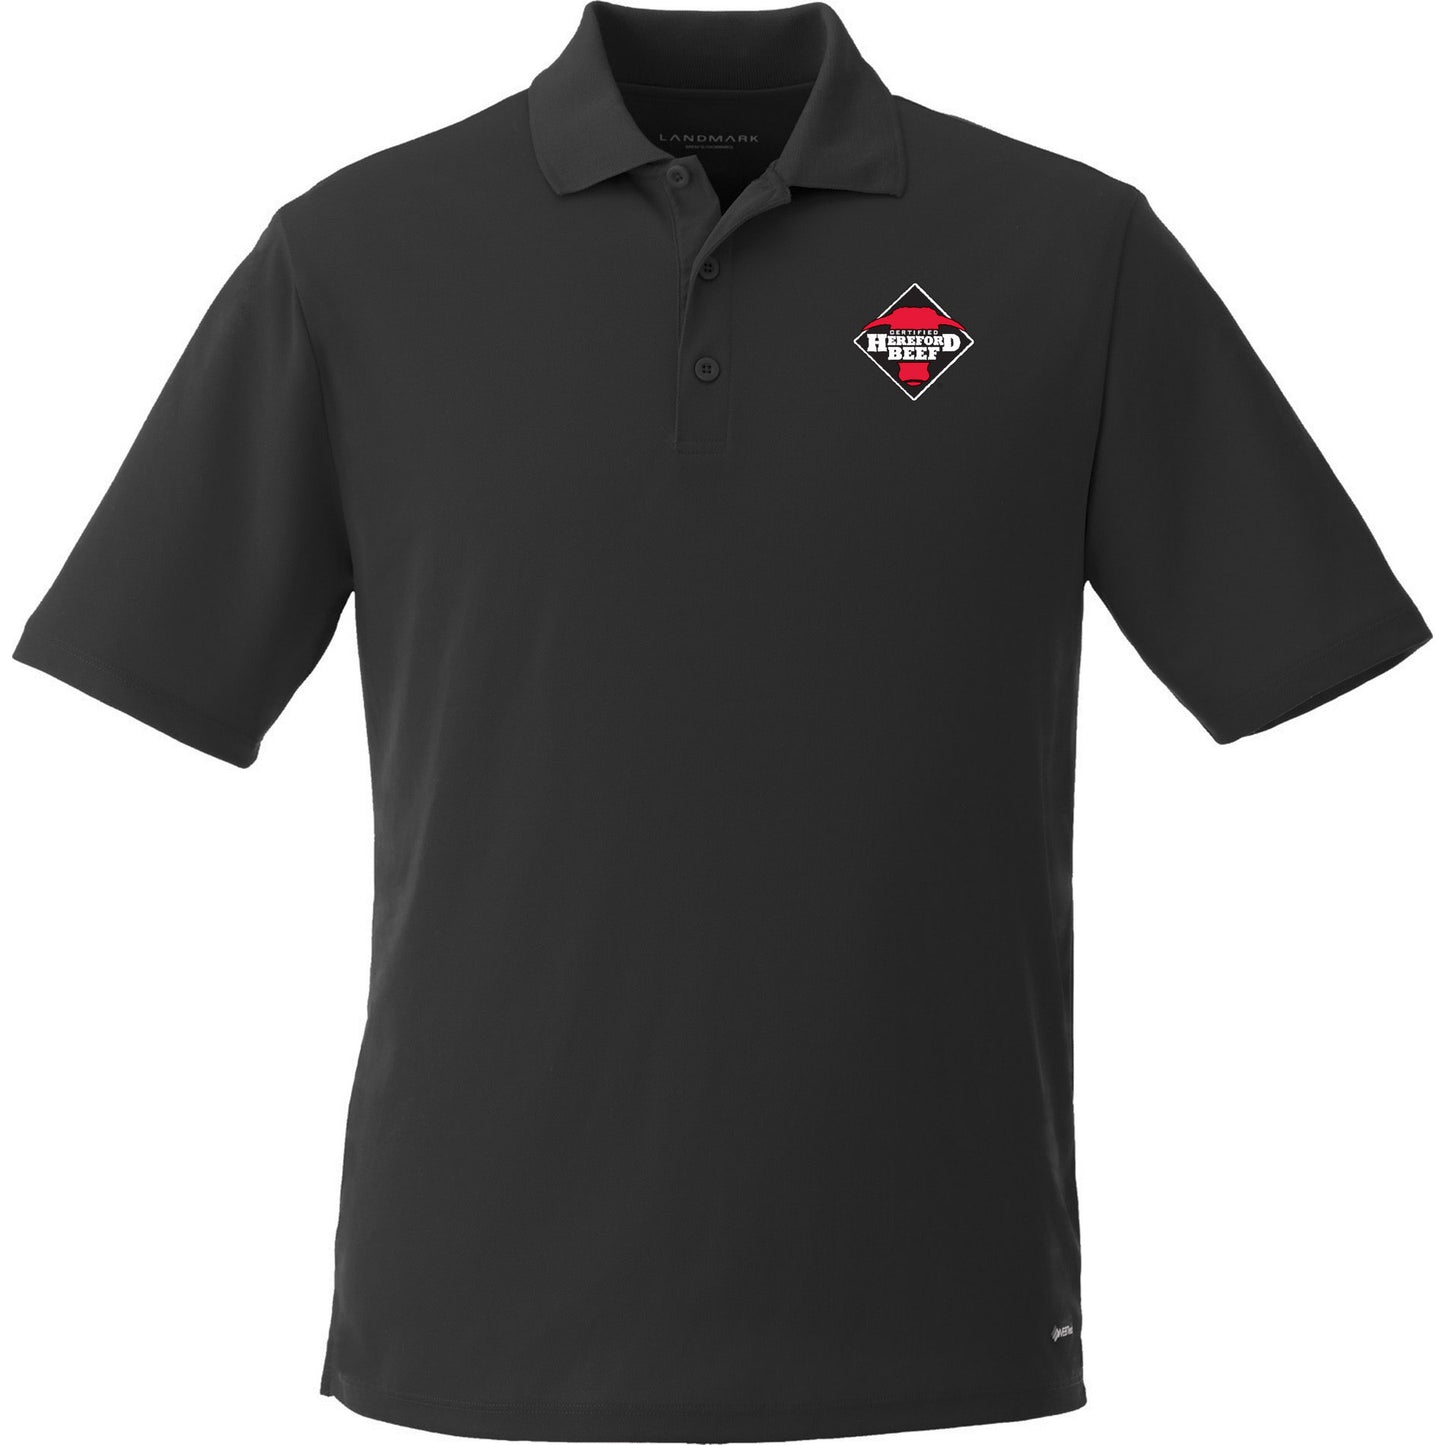 Certified Hereford Beef Men's Polo Shirt - Black